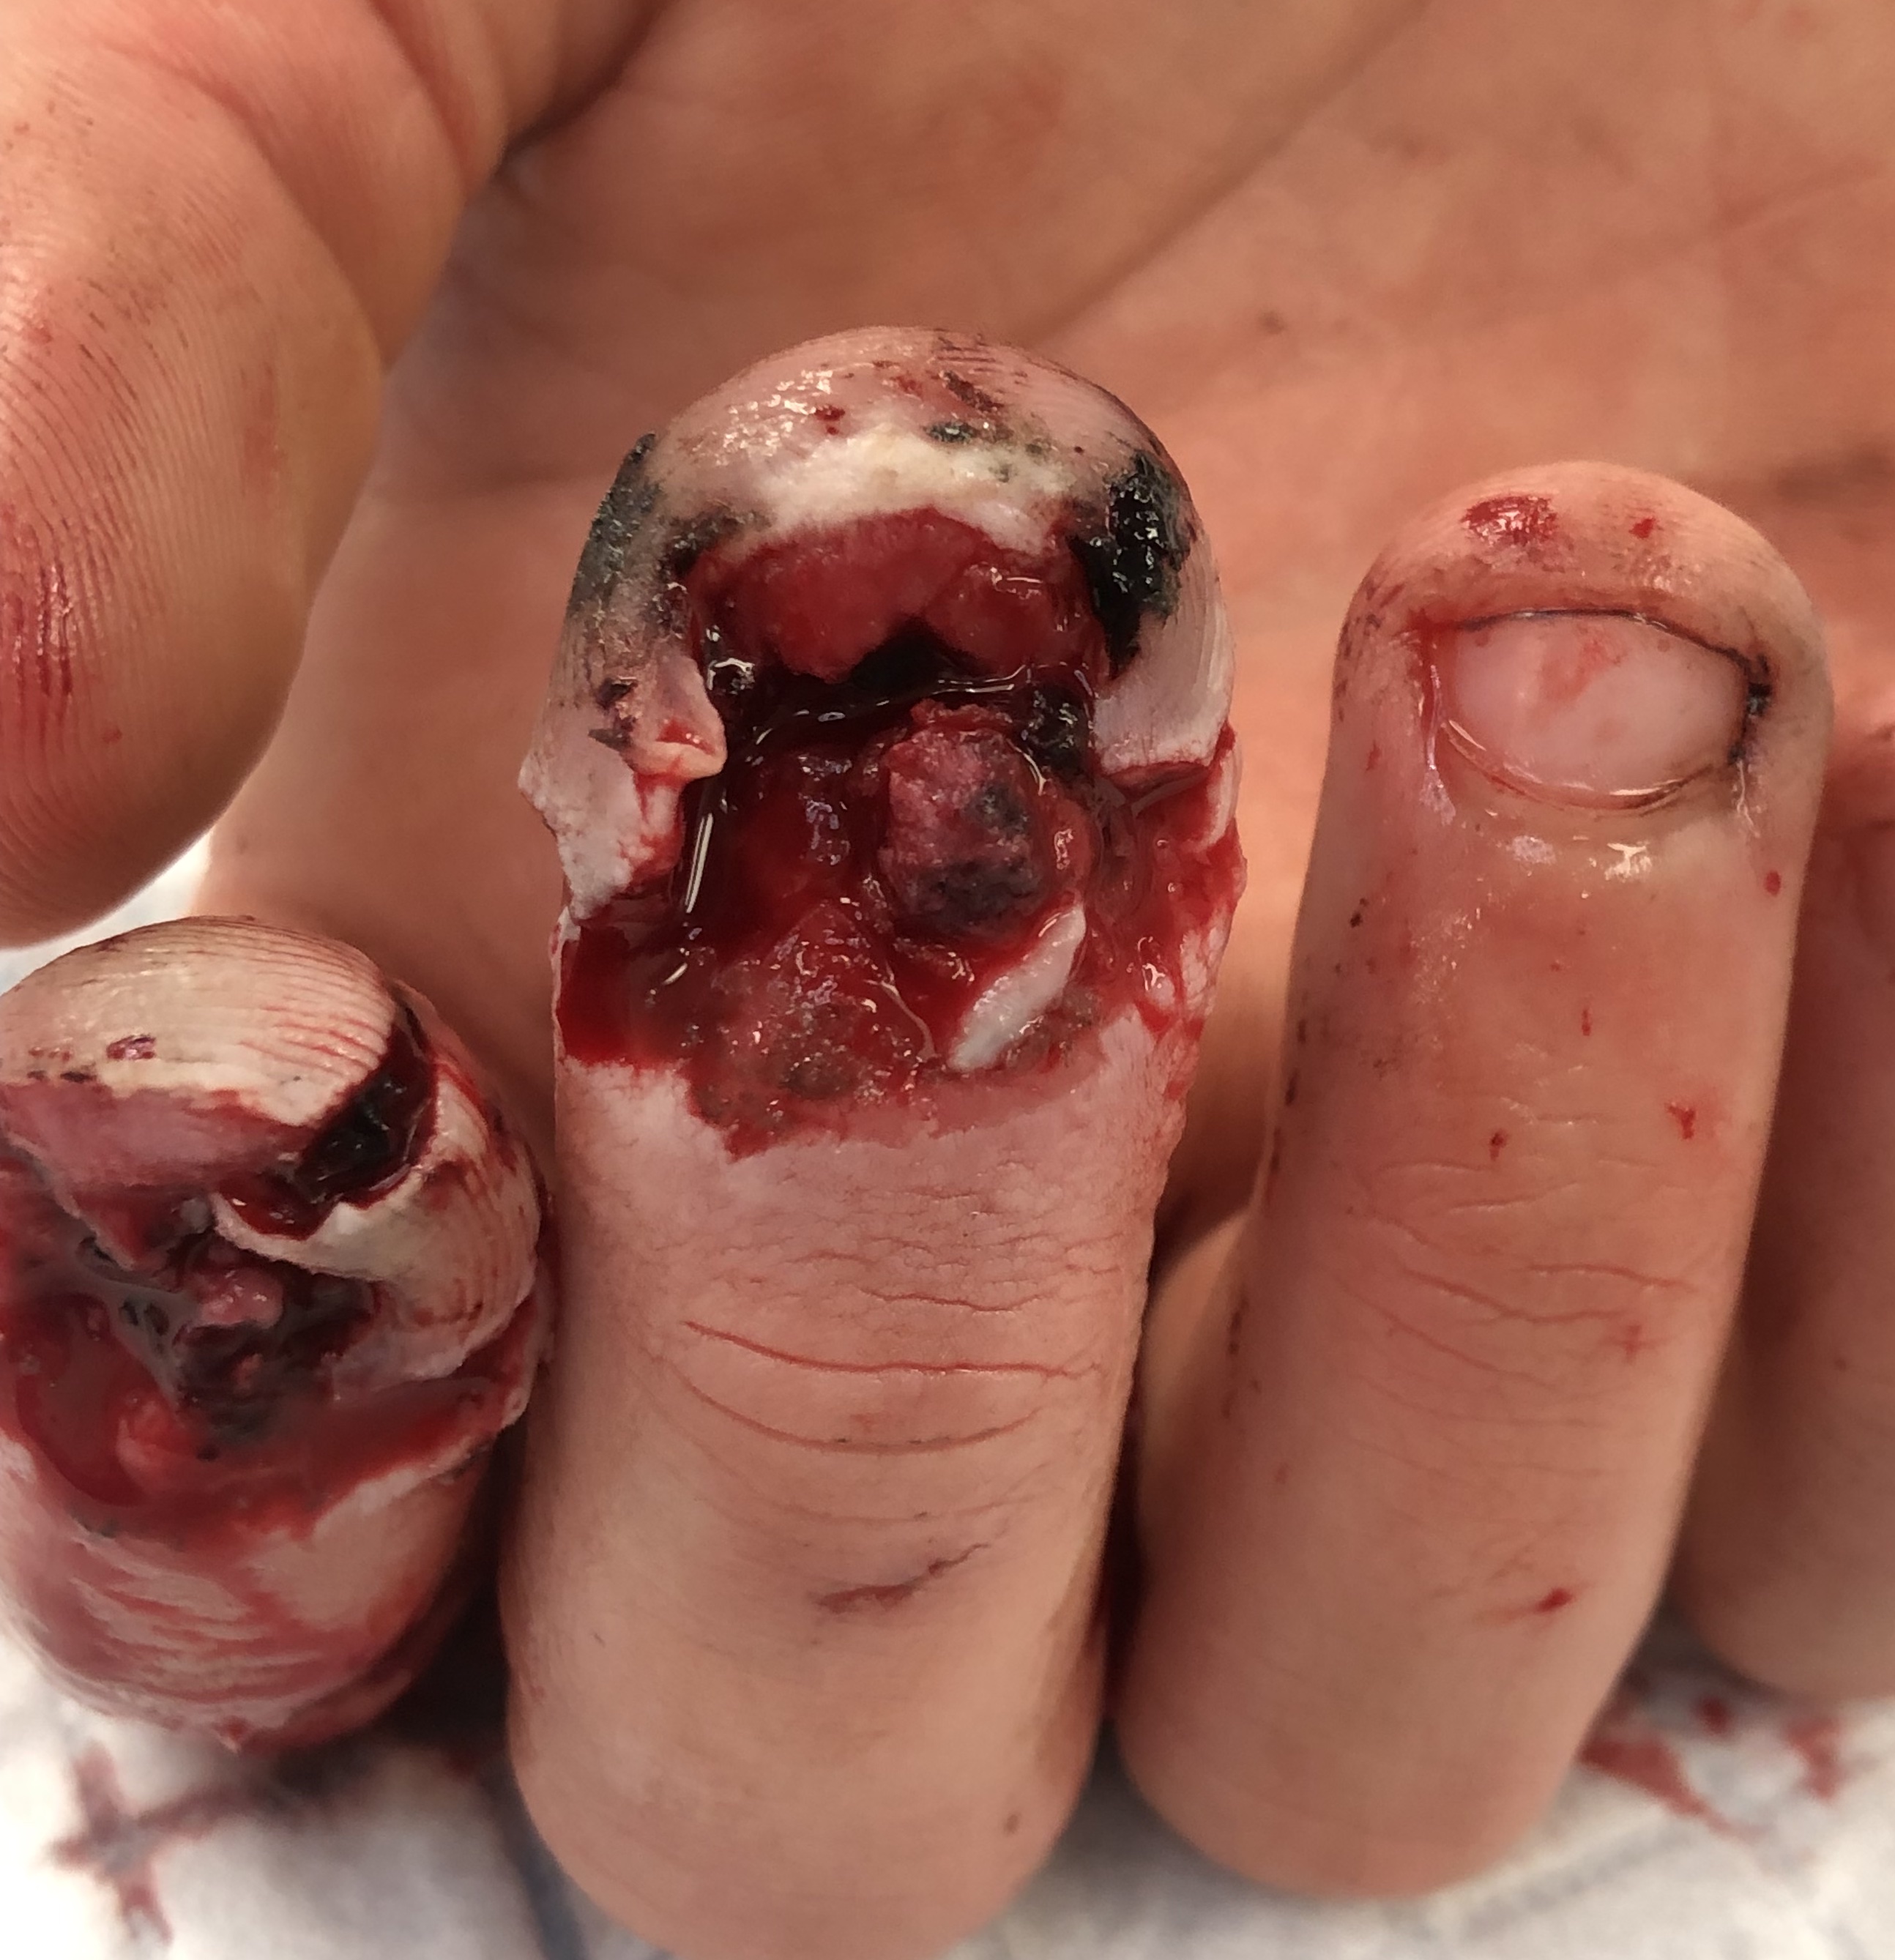 Complete nail bed injury